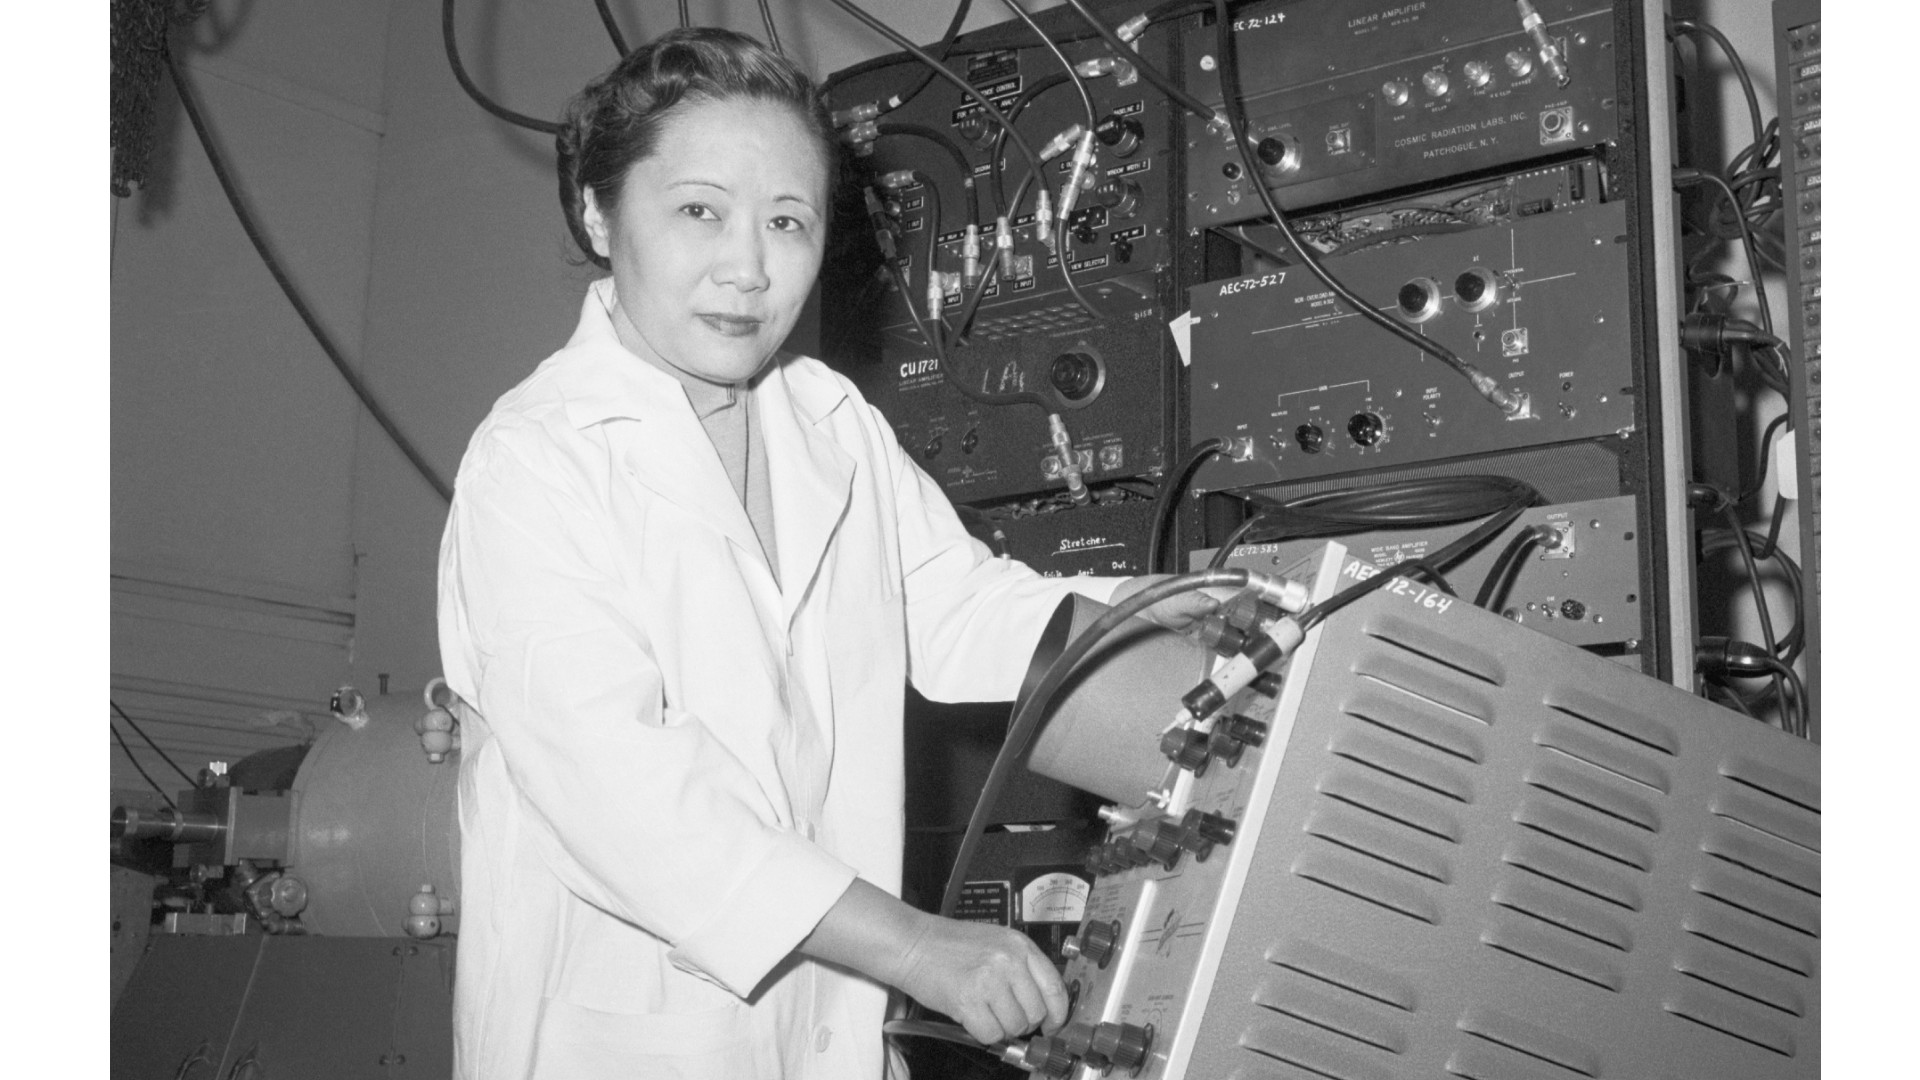 Physics Professor Dr Chien-Shiung Wu in a laboratory at Columbia University. Dr. Wu became the first woman to win the Research Corporation Award after providing the first experimental proof, along with scientists from the National Bureau of Standards, that the principle of parity conservation does not hold in weak subatomic interactions.